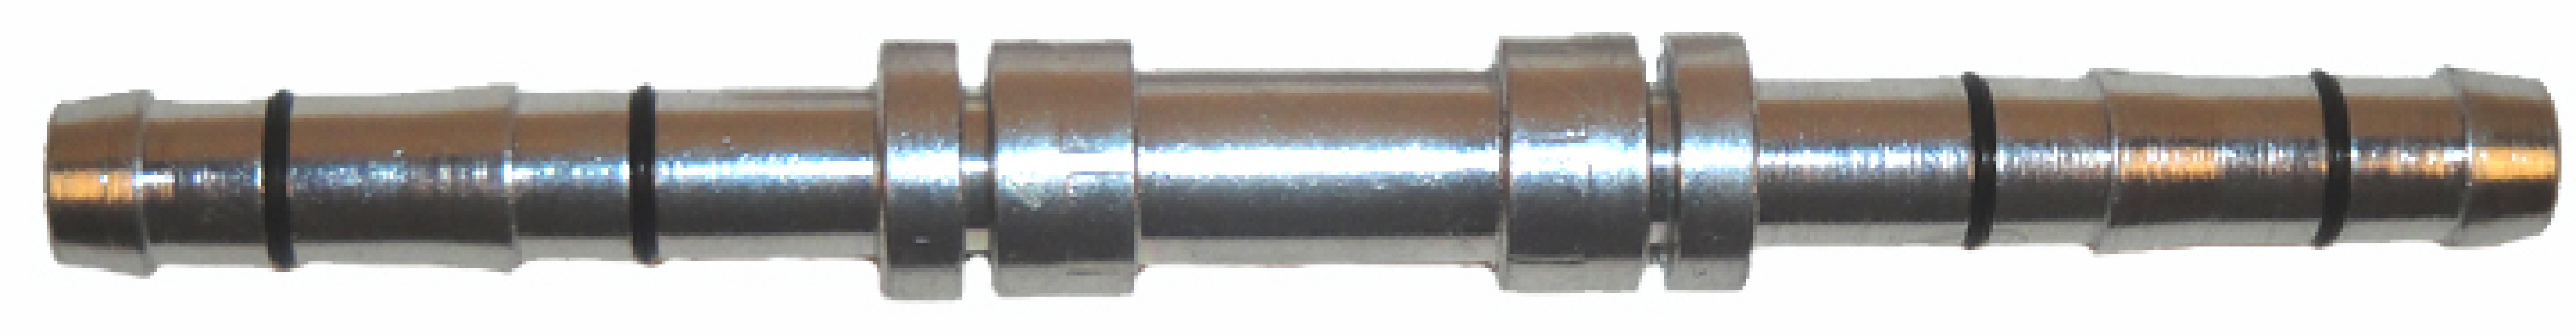 Image of A/C Refrigerant Hose Fitting from Sunair. Part number: FJ3045-0606S